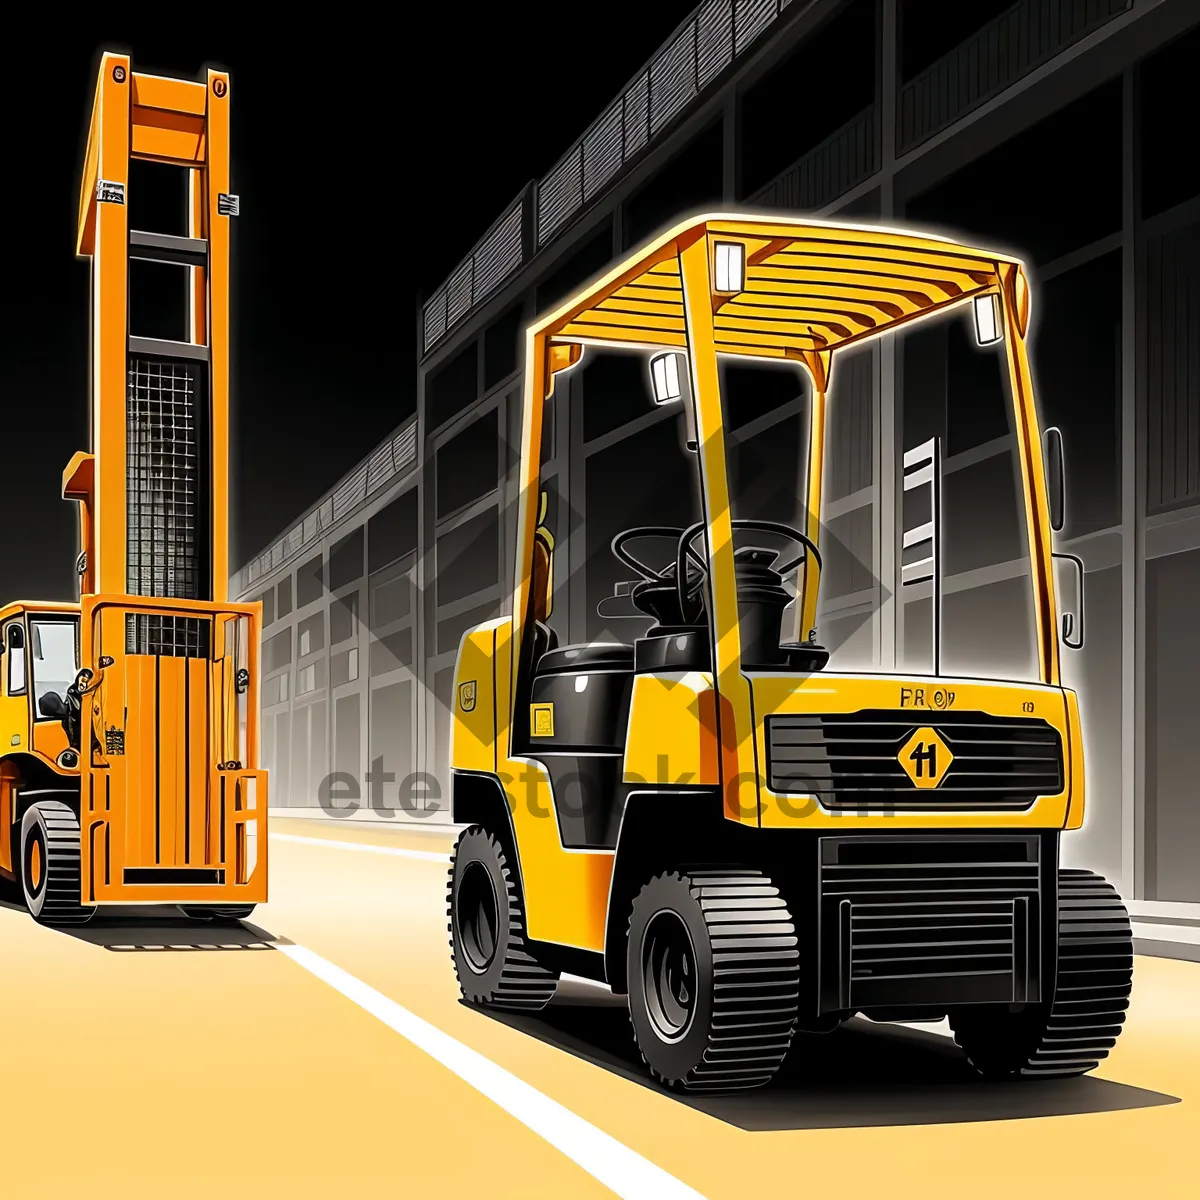 Picture of Heavy-duty Yellow Forklift in Industrial Warehouse